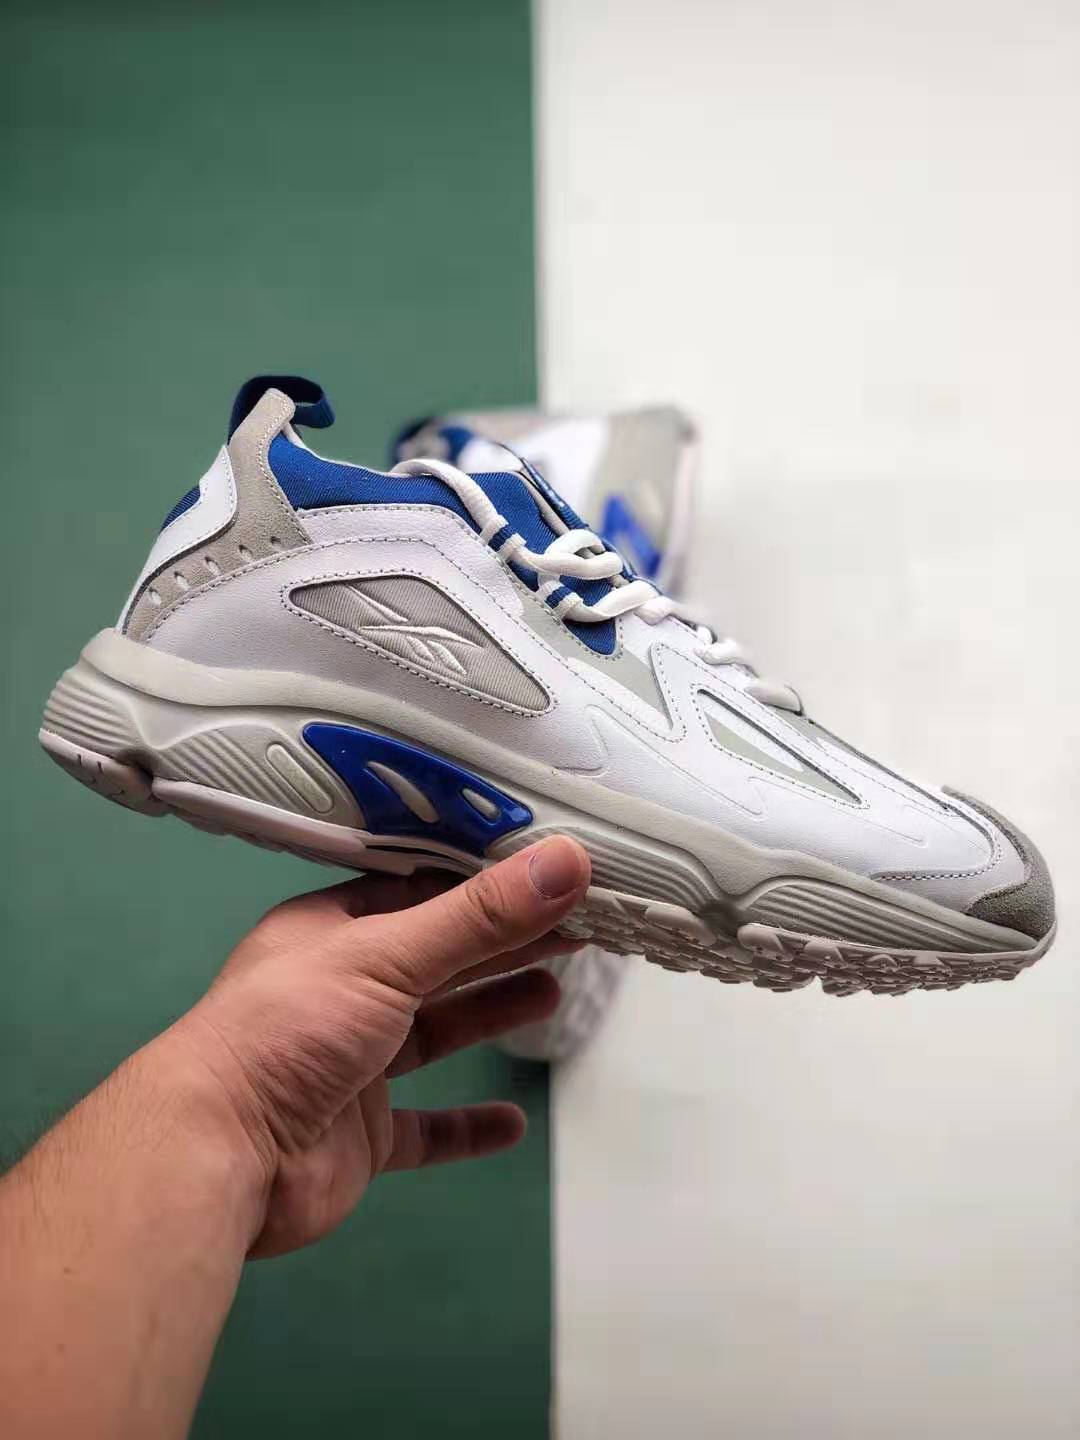 Reebok DMX Series 1200 LT 'White' DV7541 - Premium Sneakers for Unmatched Style and Comfort